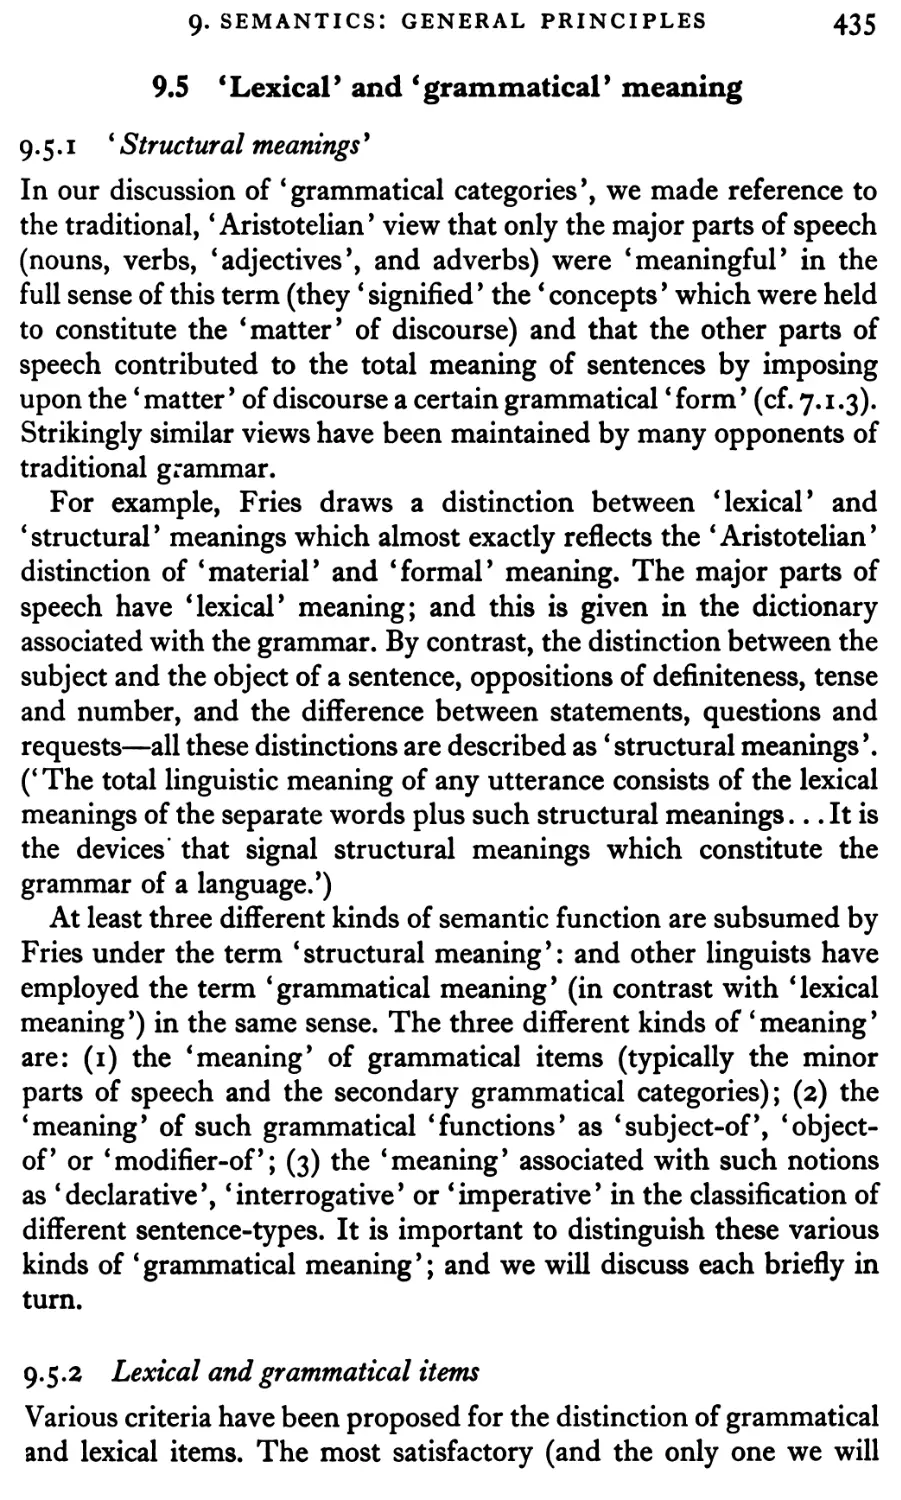 9.5 ‘Lexical’ and ‘grammatical’ meaning